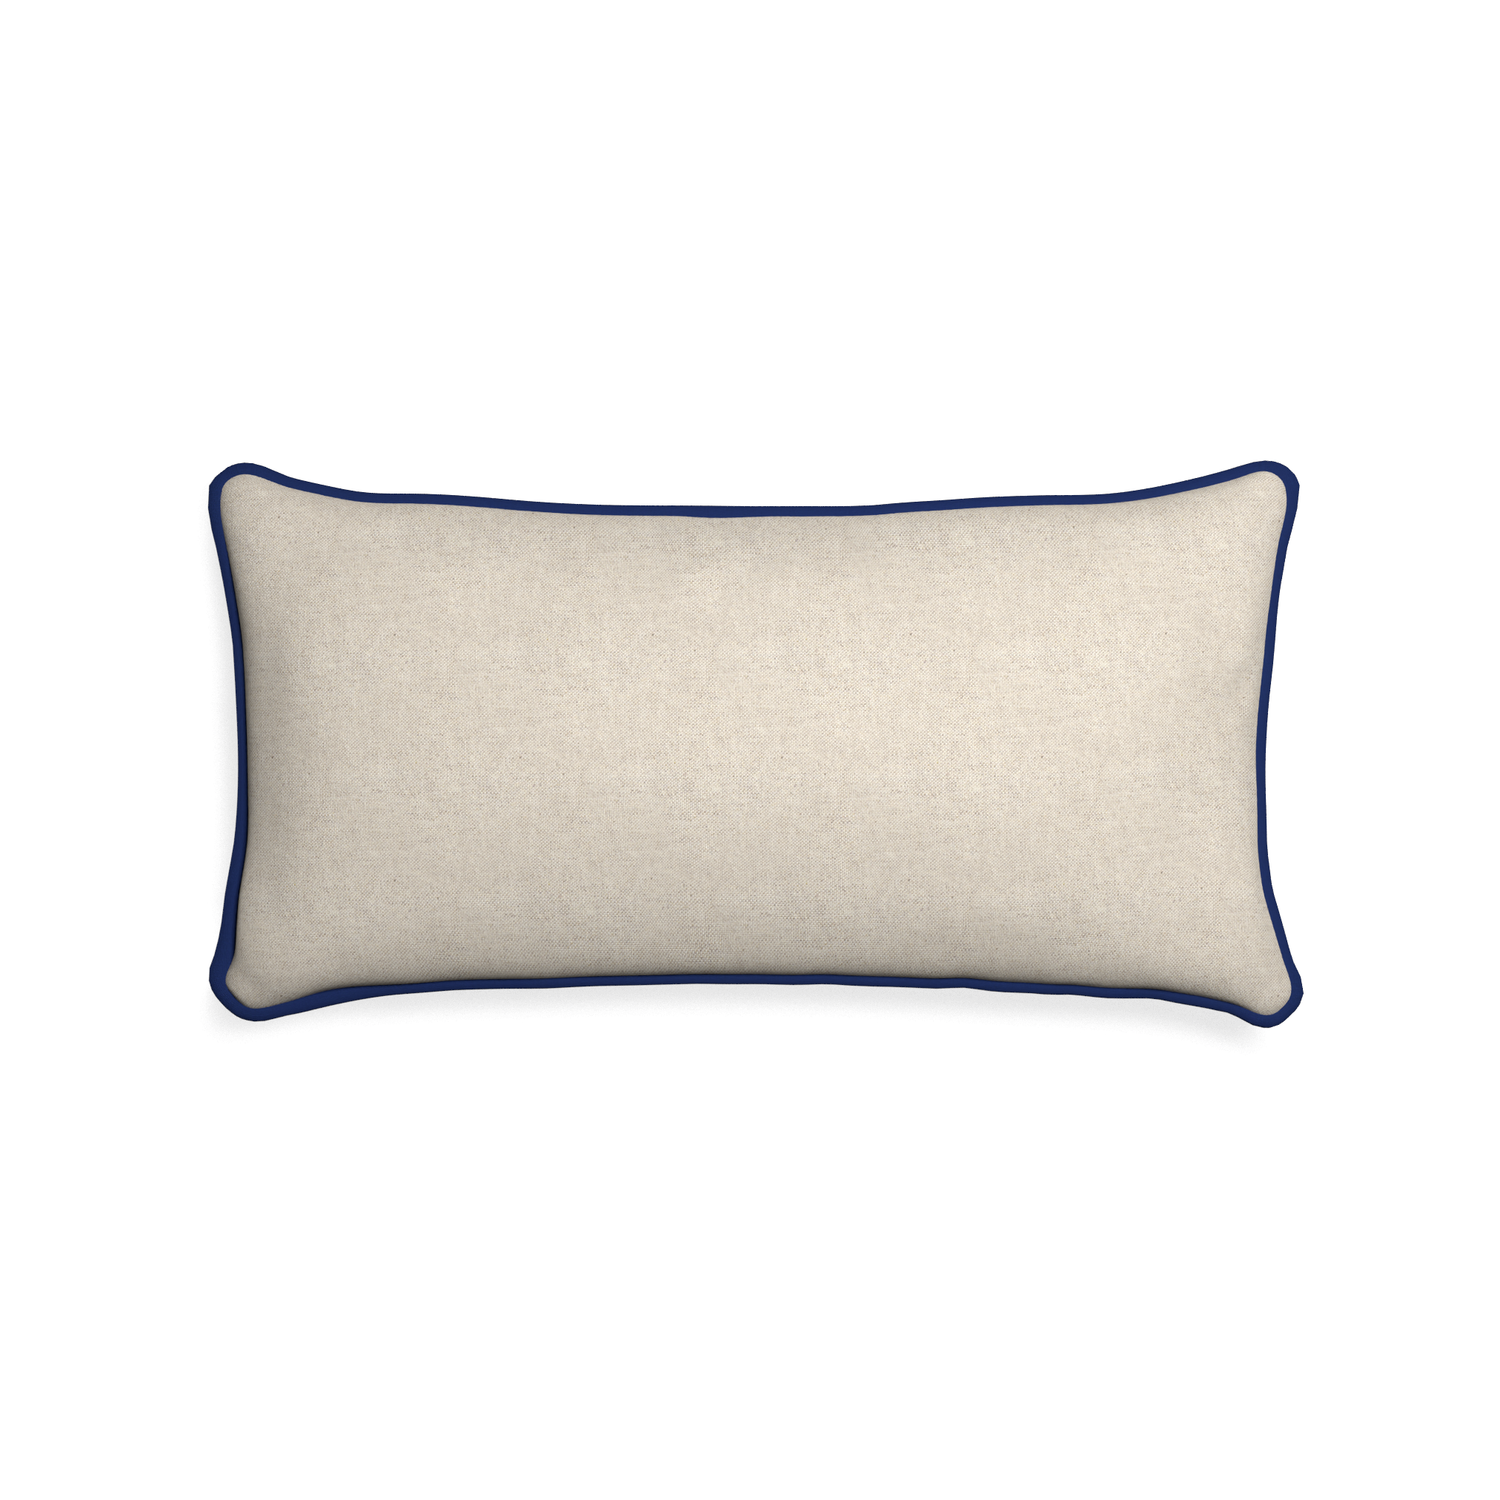 Midi-lumbar oat custom light brownpillow with midnight piping on white background